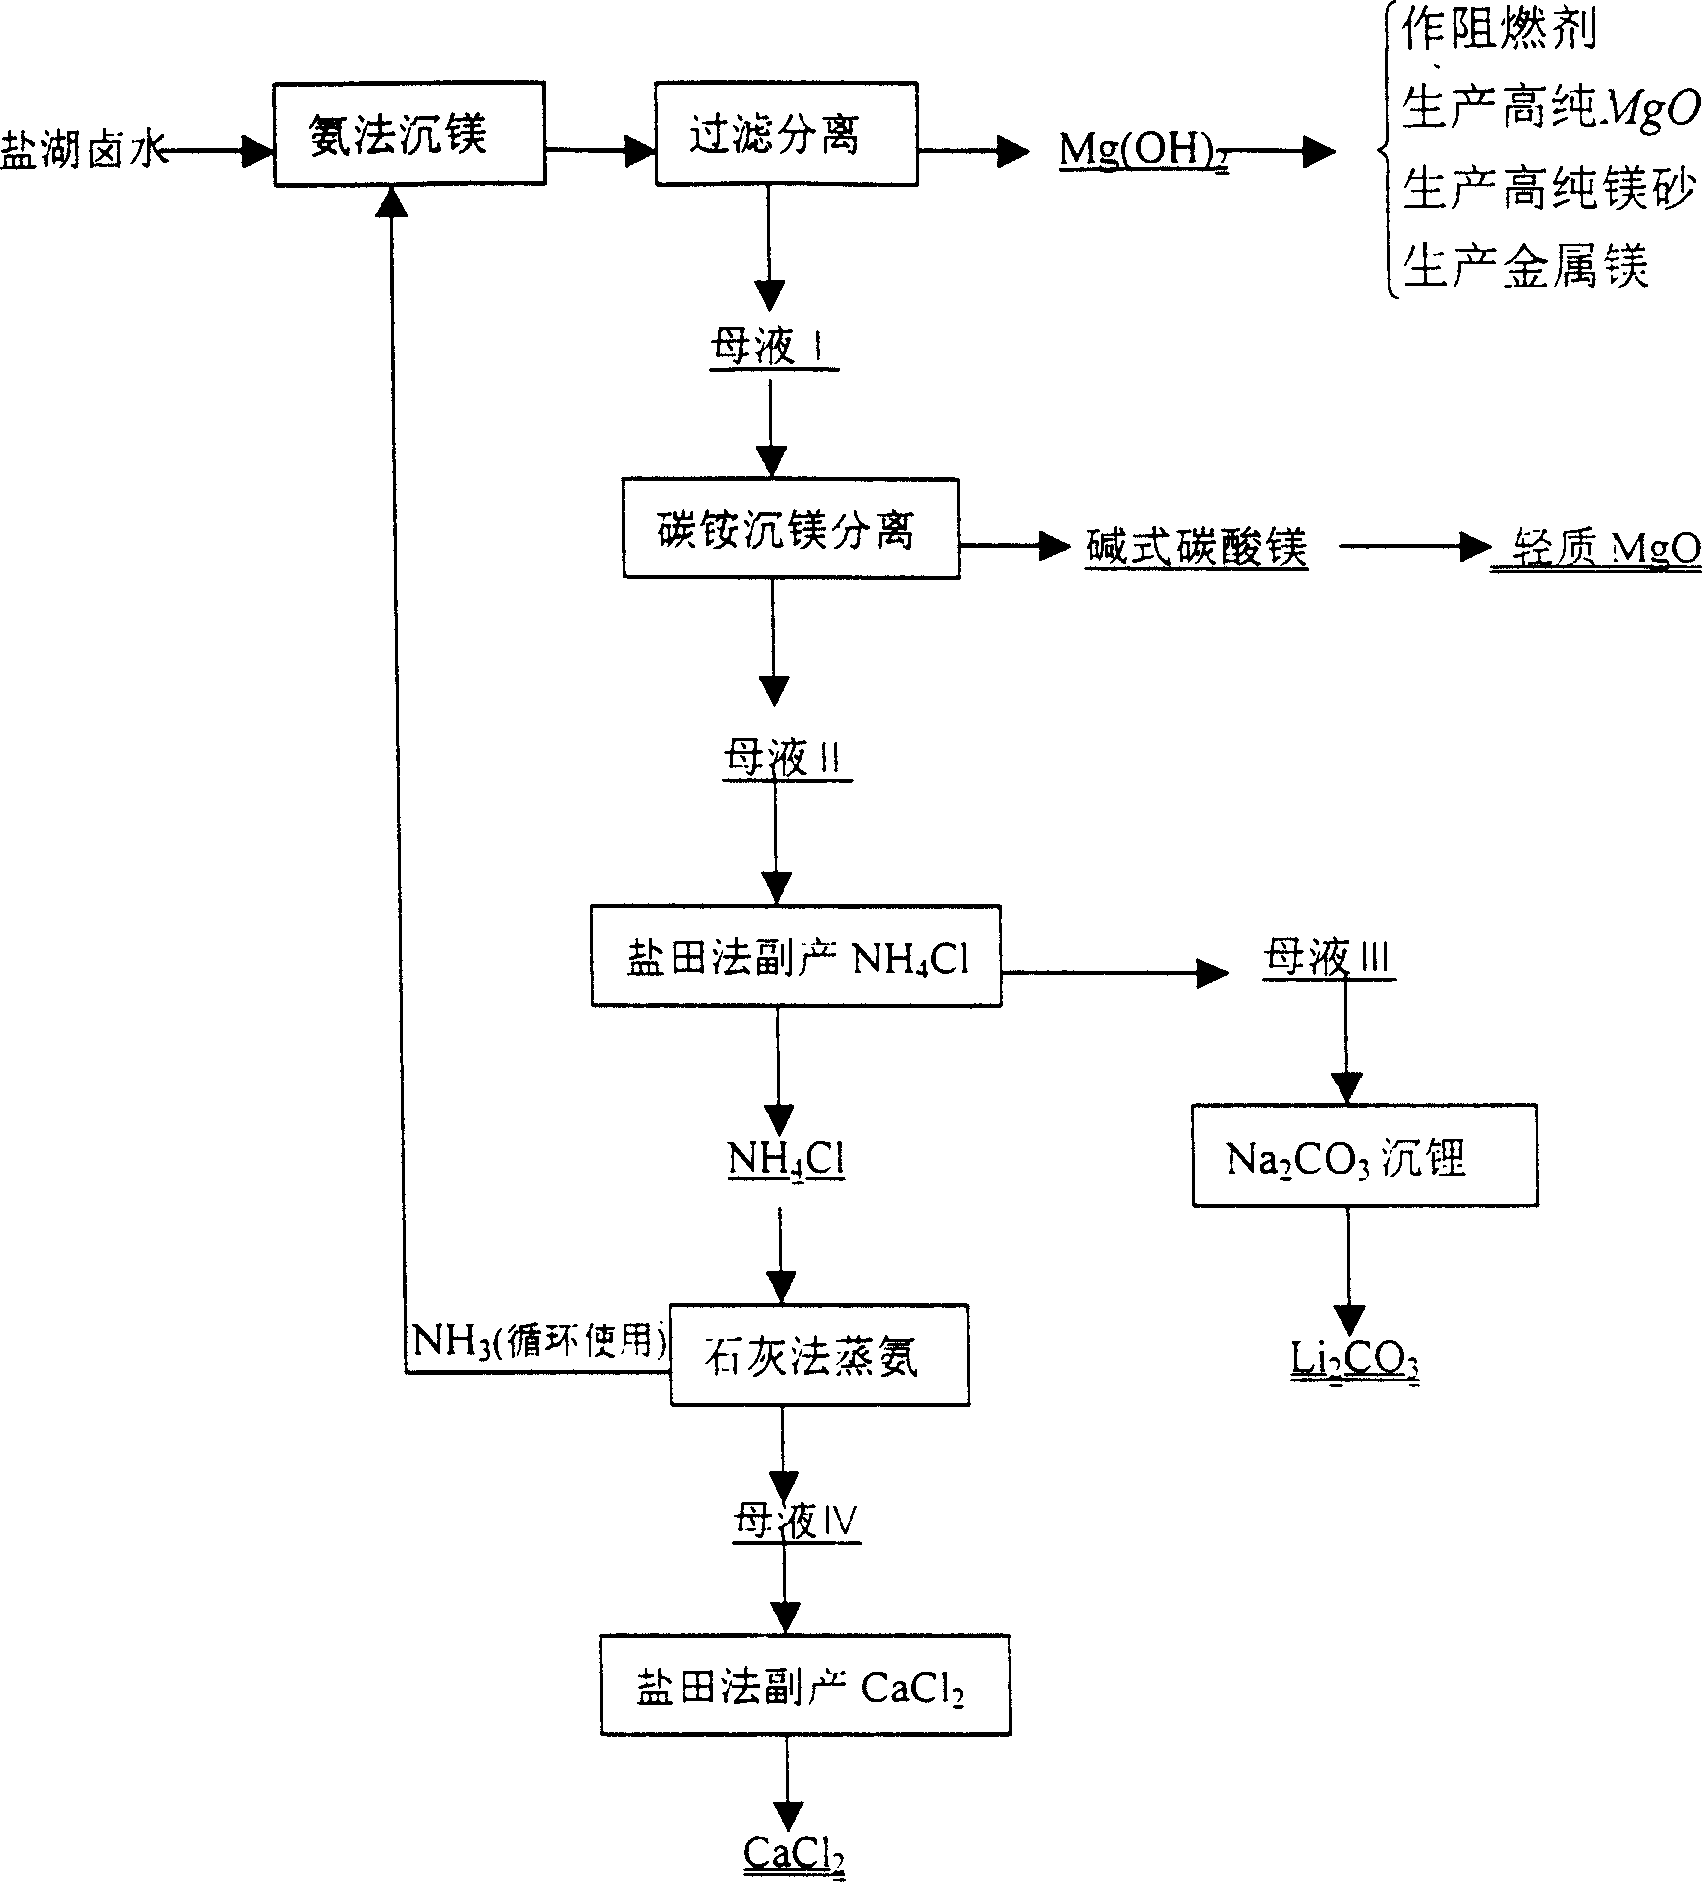 Method of combined extraction of magnesium and lithium in salt lake bittern